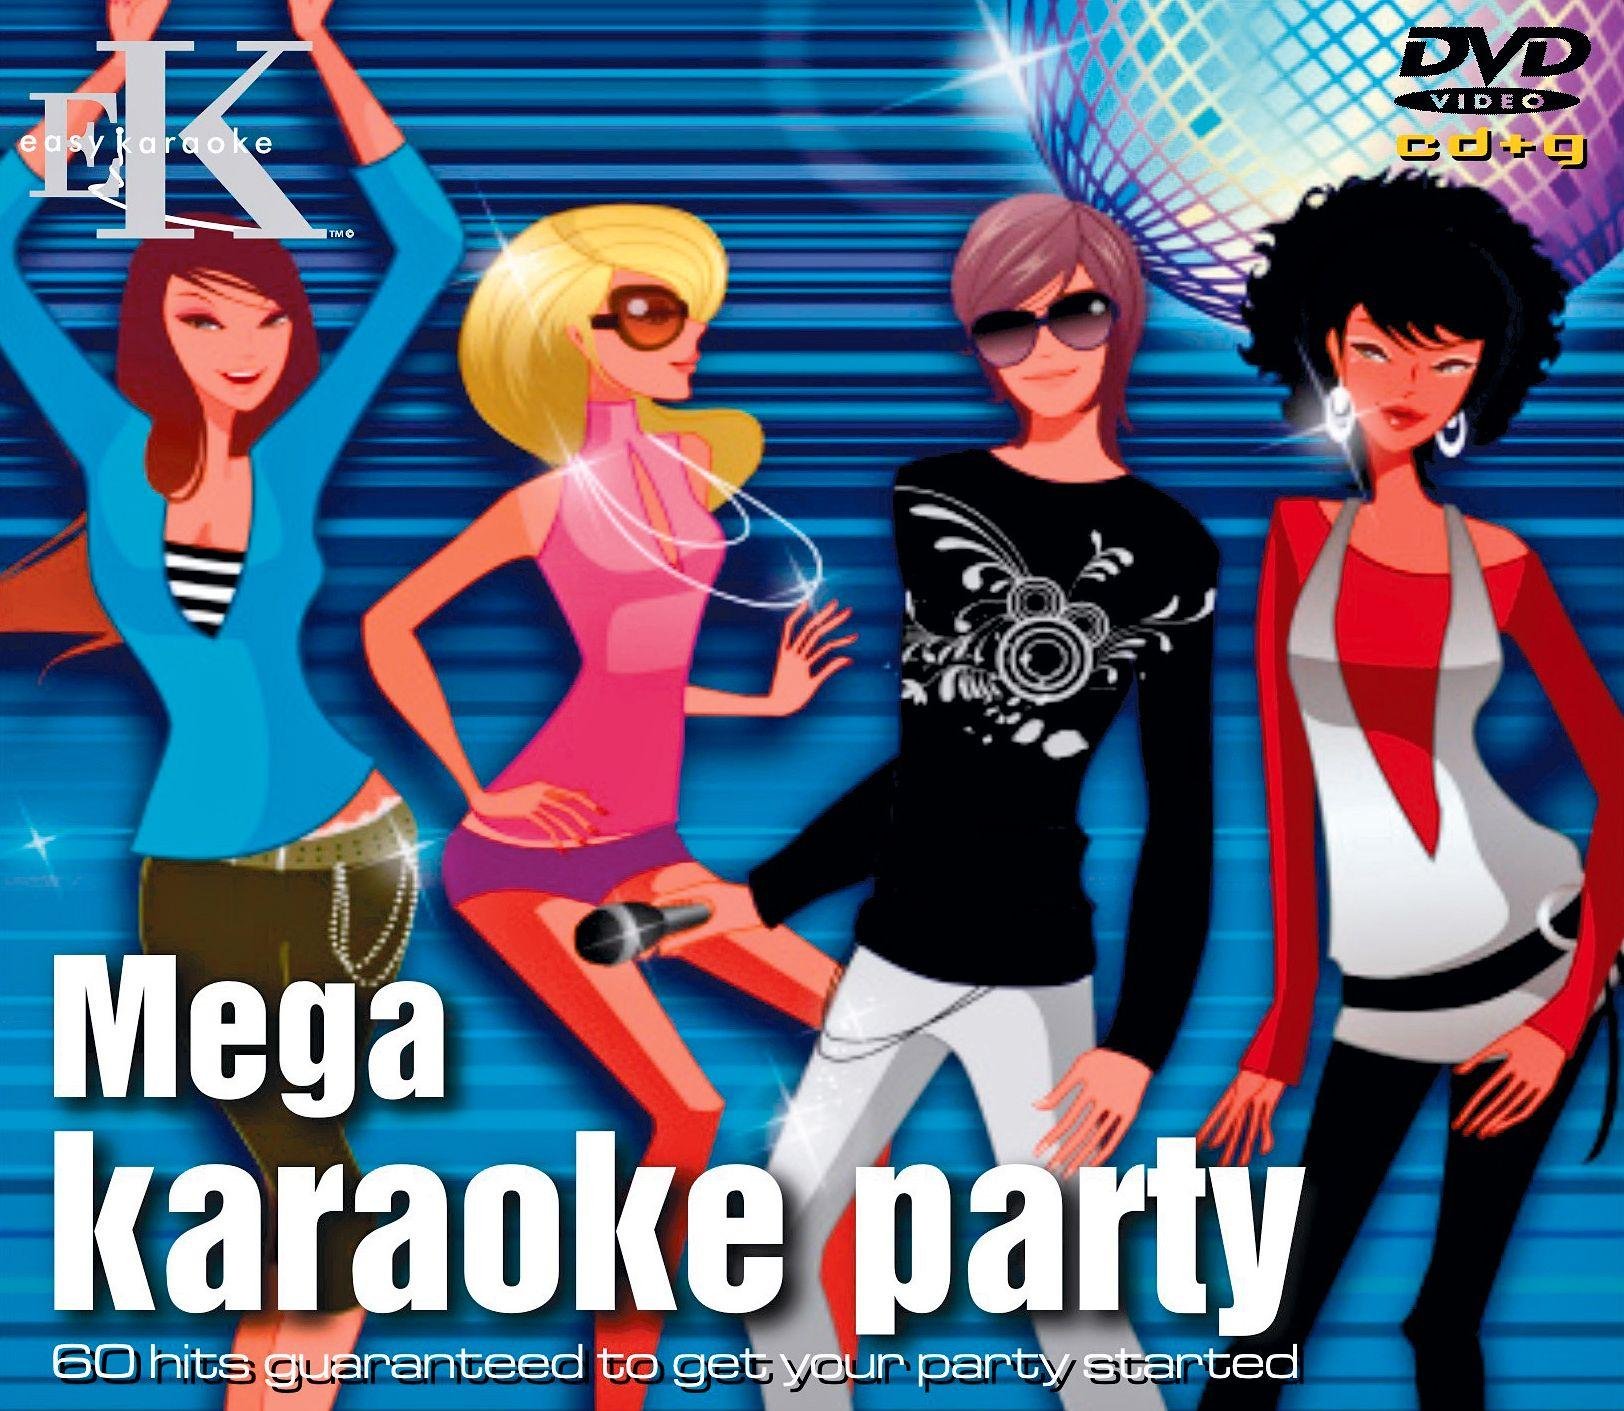 Easy Karaoke Party Hits CD+G and DVD Pack Review